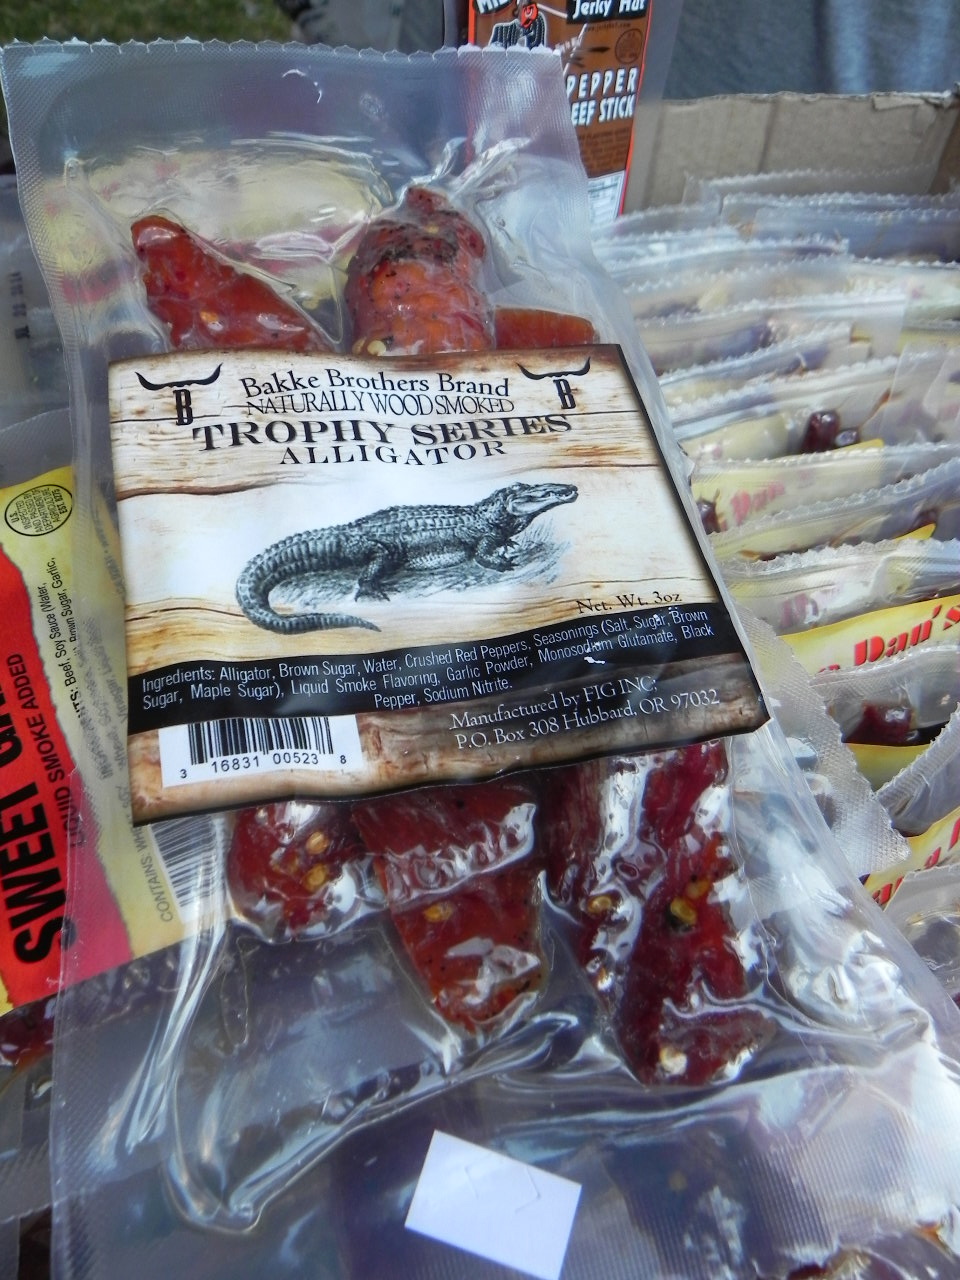 Alligator Jerky was one of the more exotic items at the food booths.   These alligators aren’t locals. The company ships them in from Louisiana. Photo: Gina Scialabba